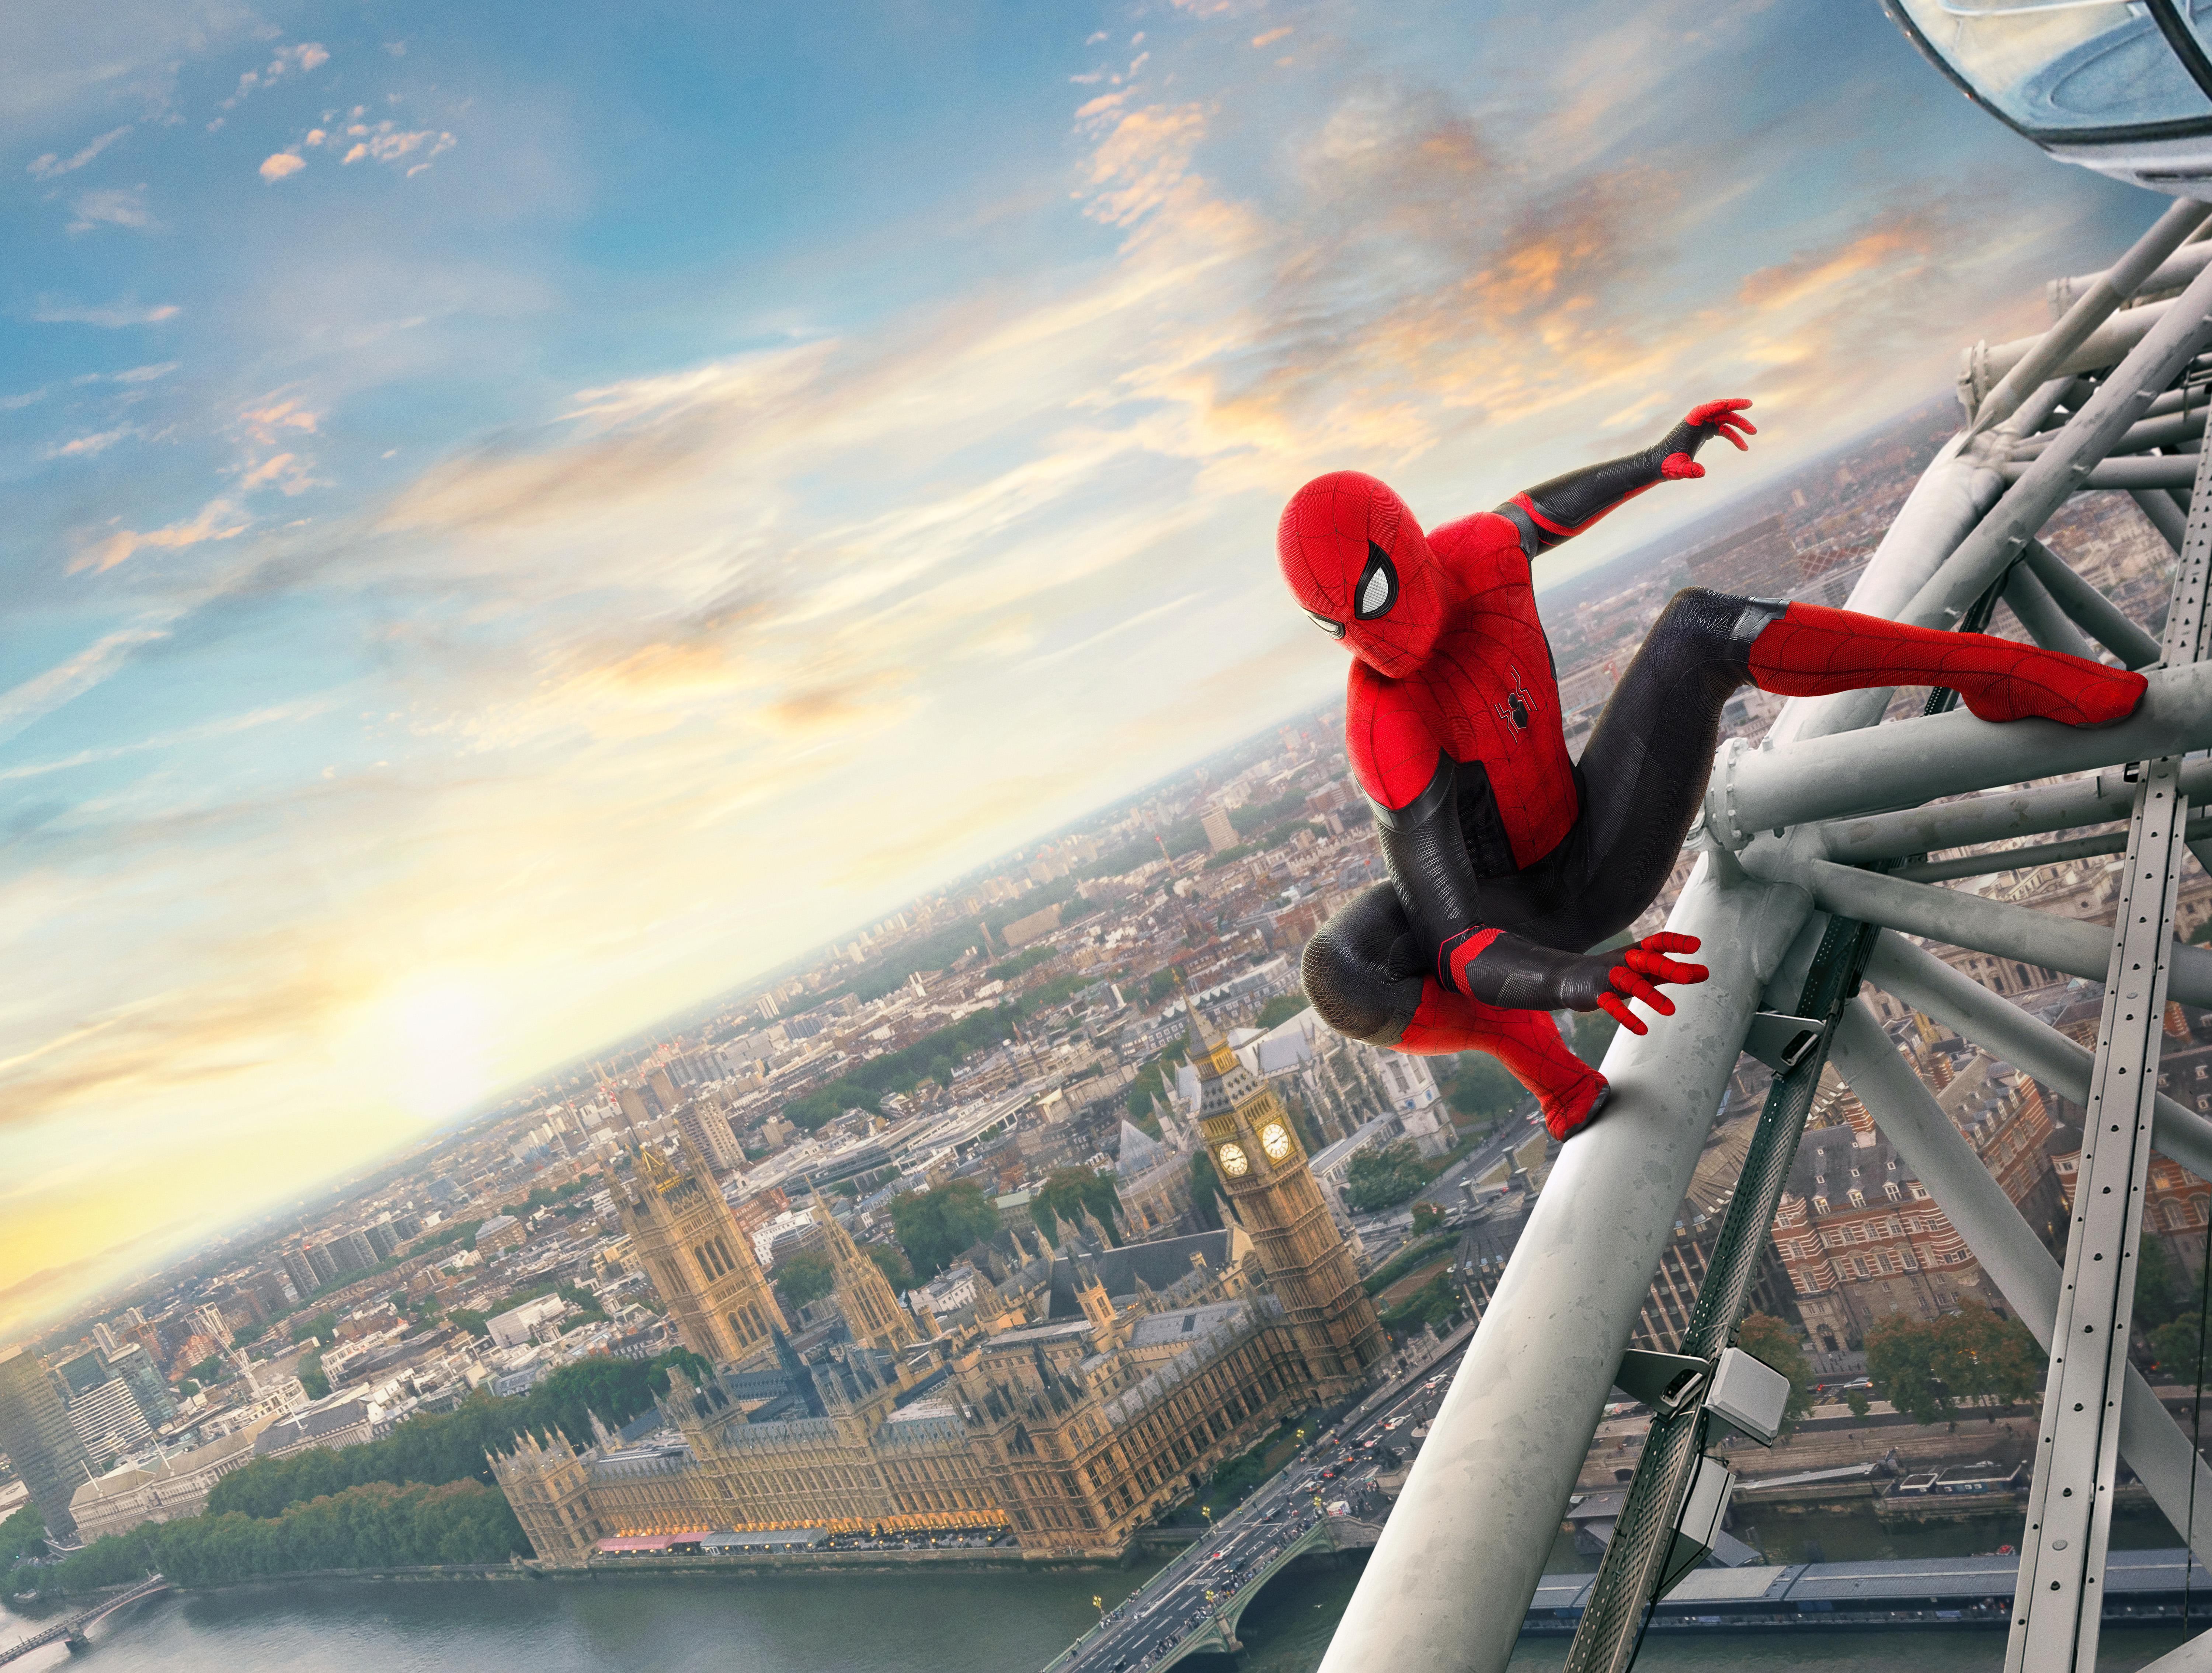 Wallpaper Spider Man: Far From Home, 4K, 5K, Movies